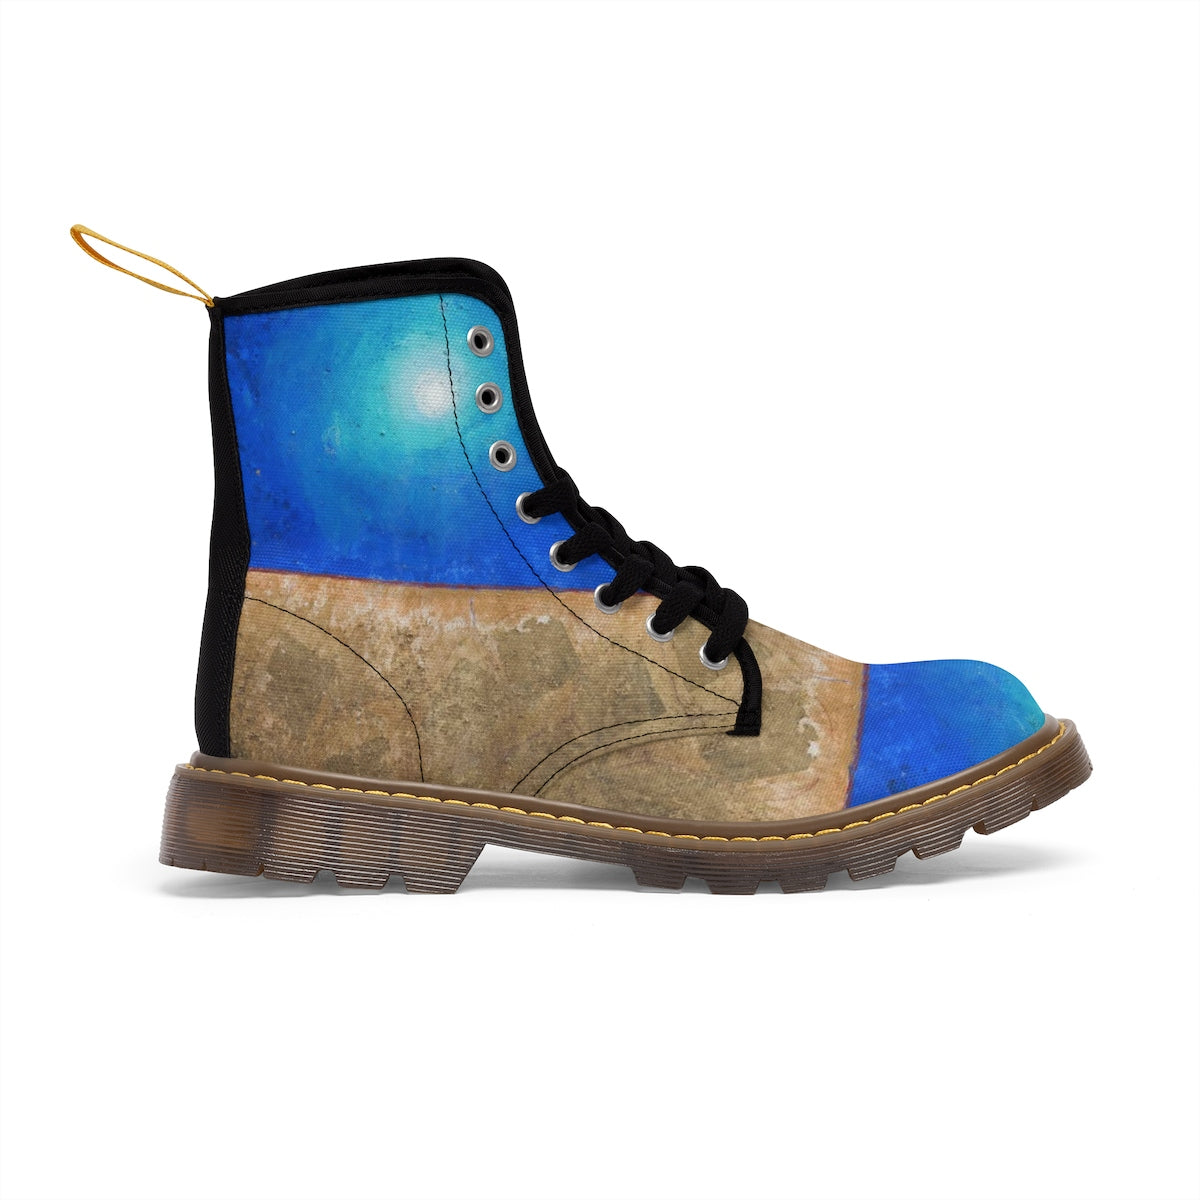 Women's Canvas Boots - Plant a seed in mind - centauresse